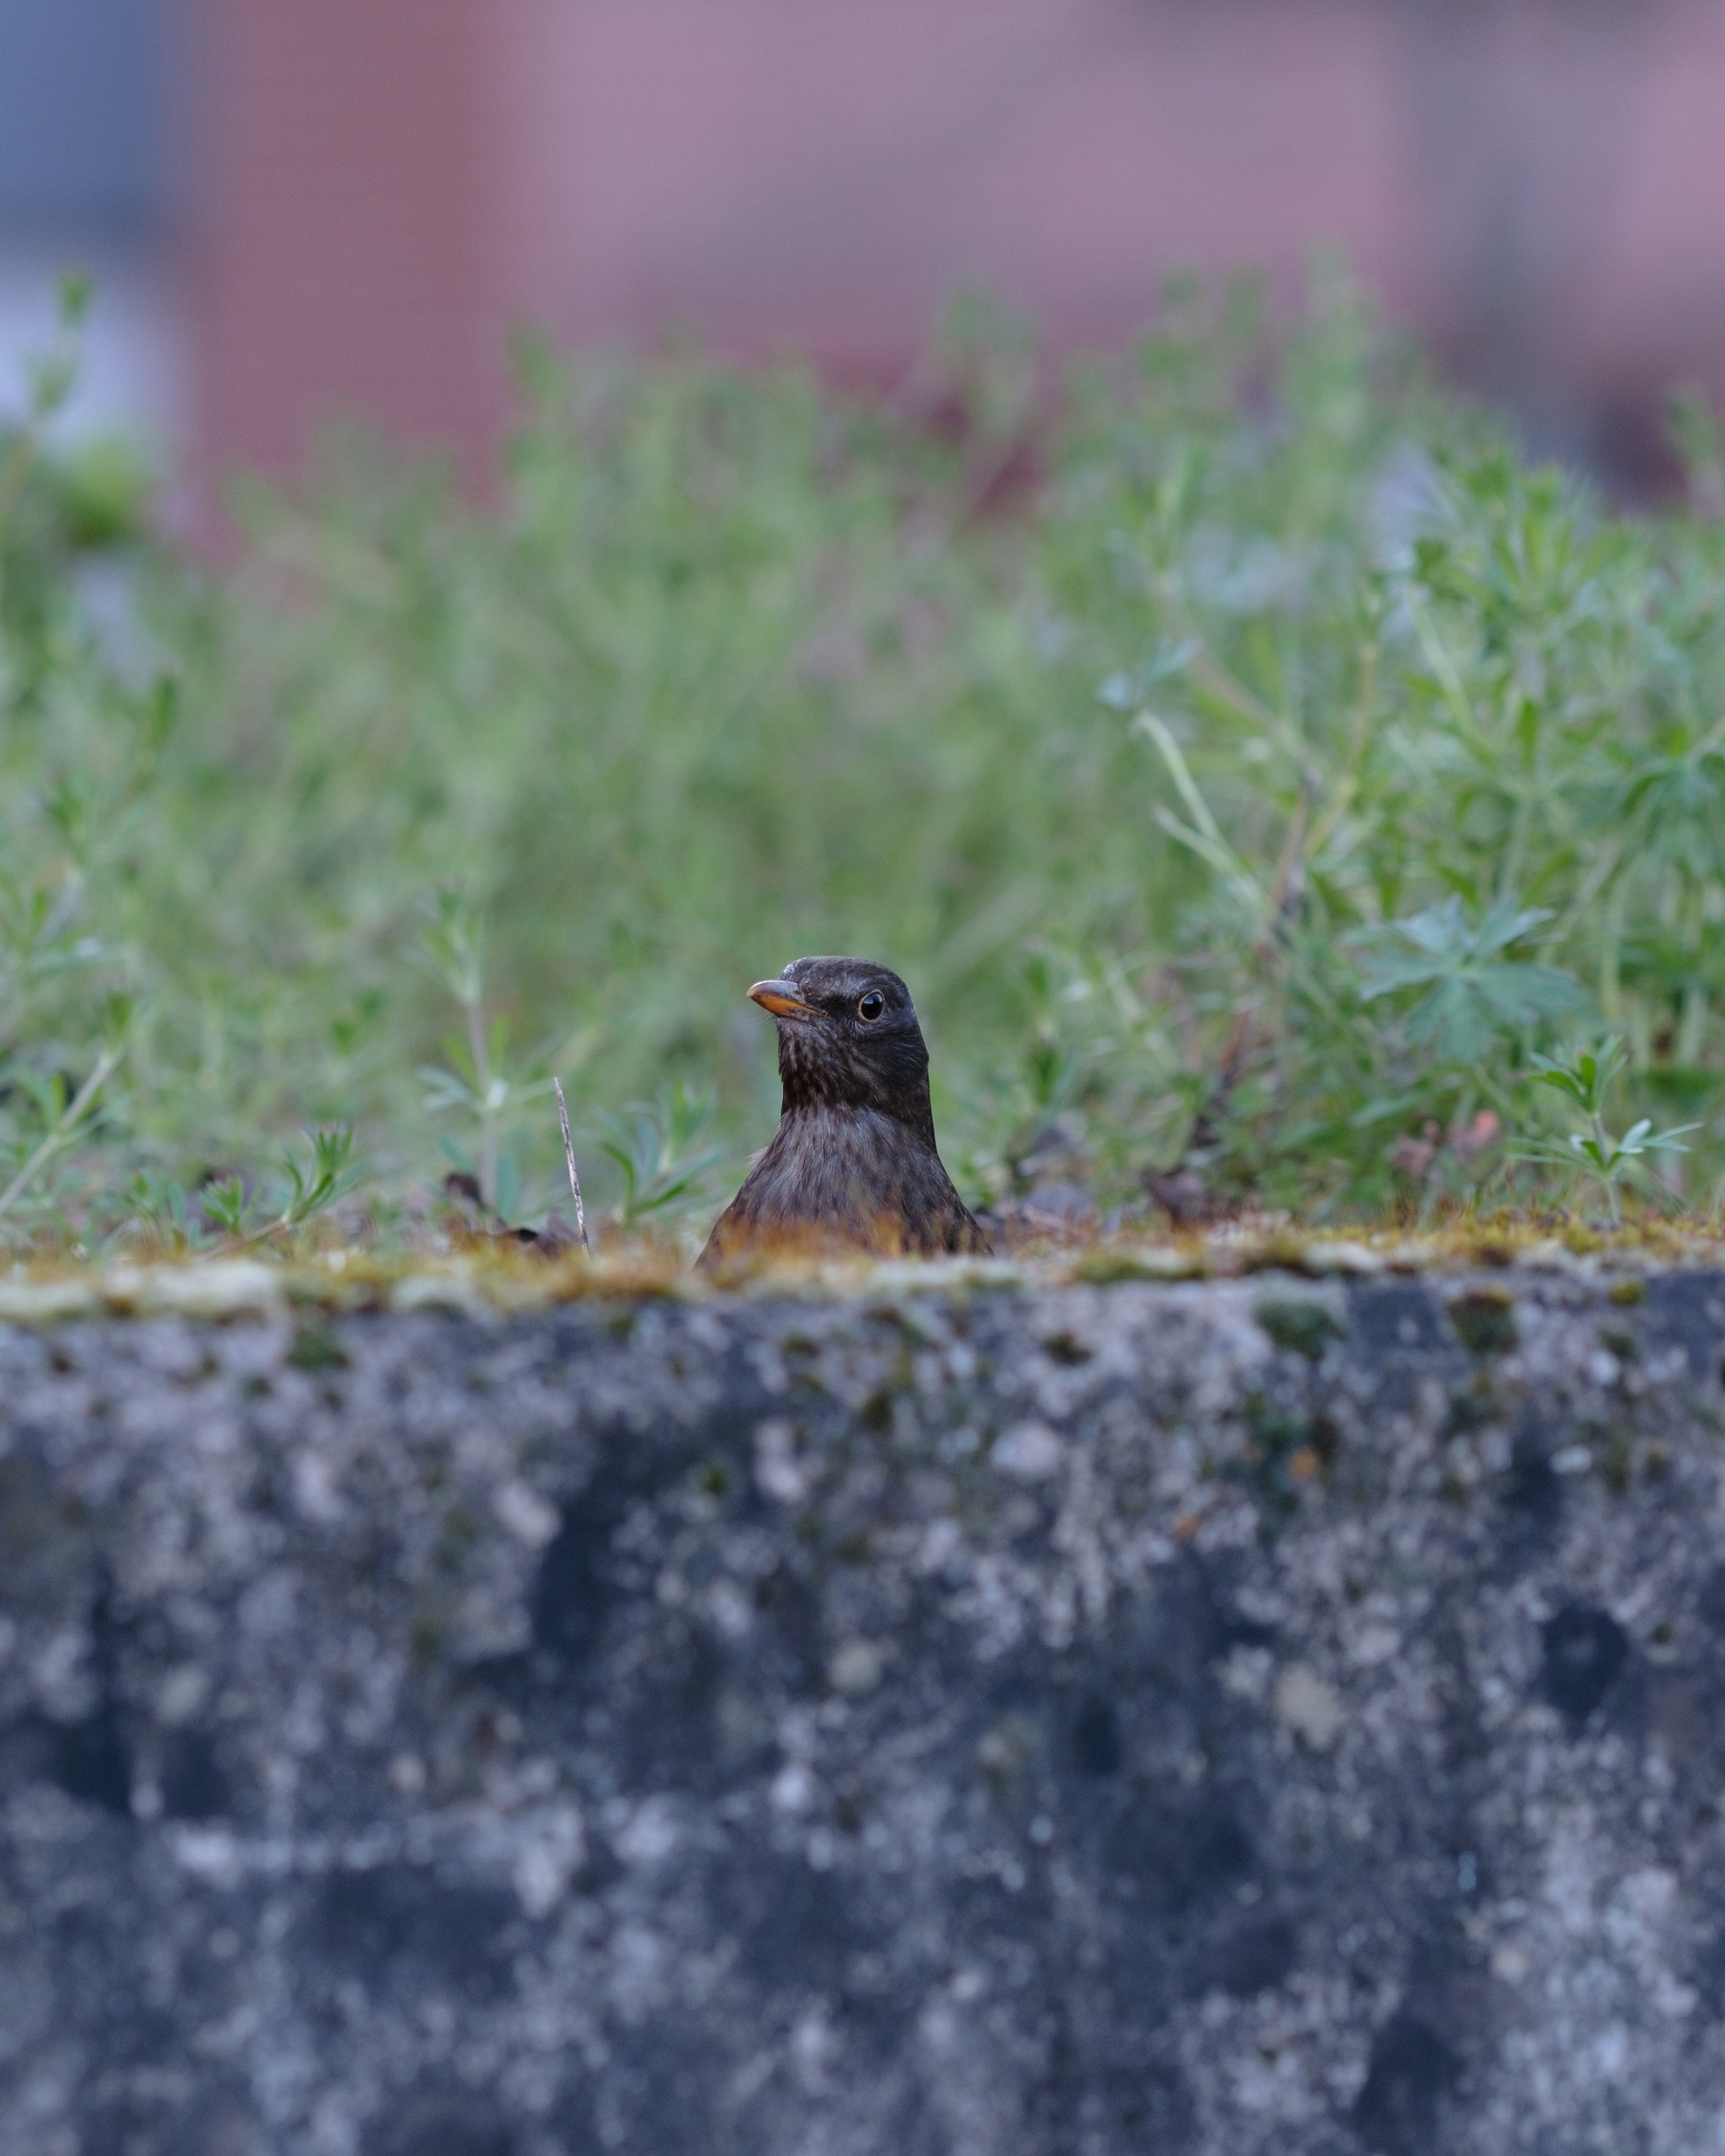 Female blackbird looking up over a concrete wall, only its head and neck visible. Blurry in the background some greens are visible. 